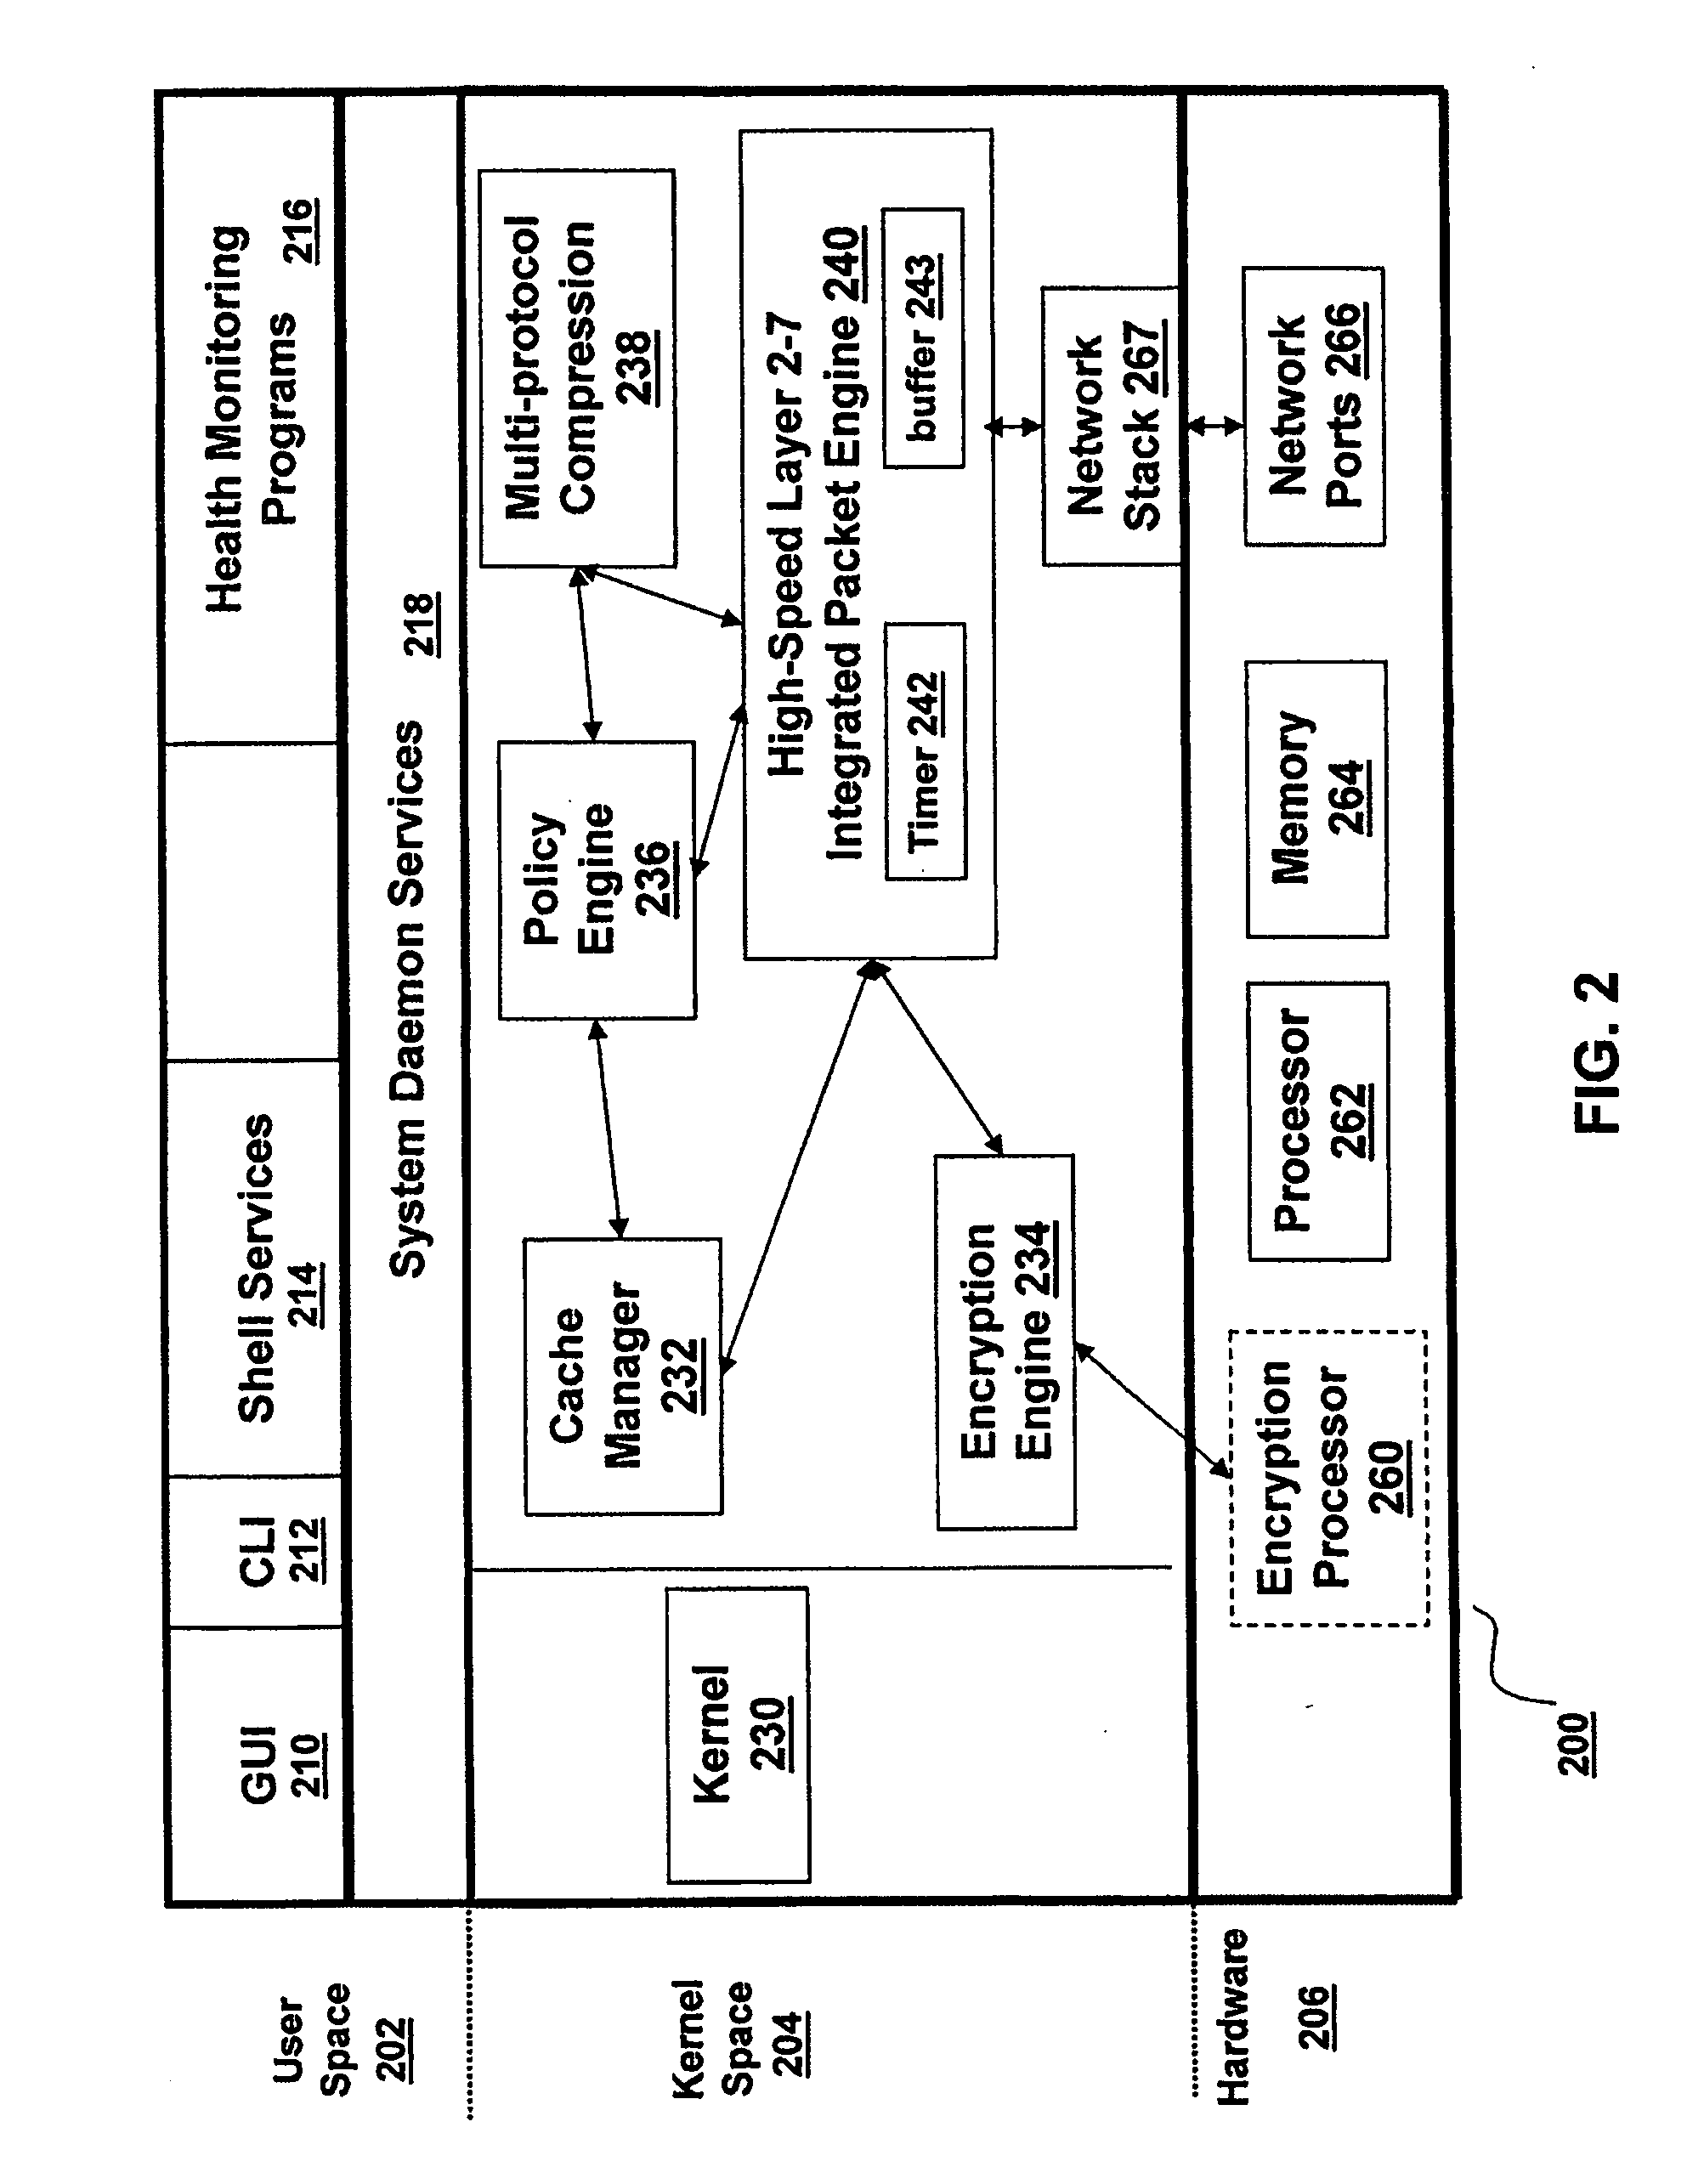 System and method for performing flash caching of dynamically generated objects in a data communication network